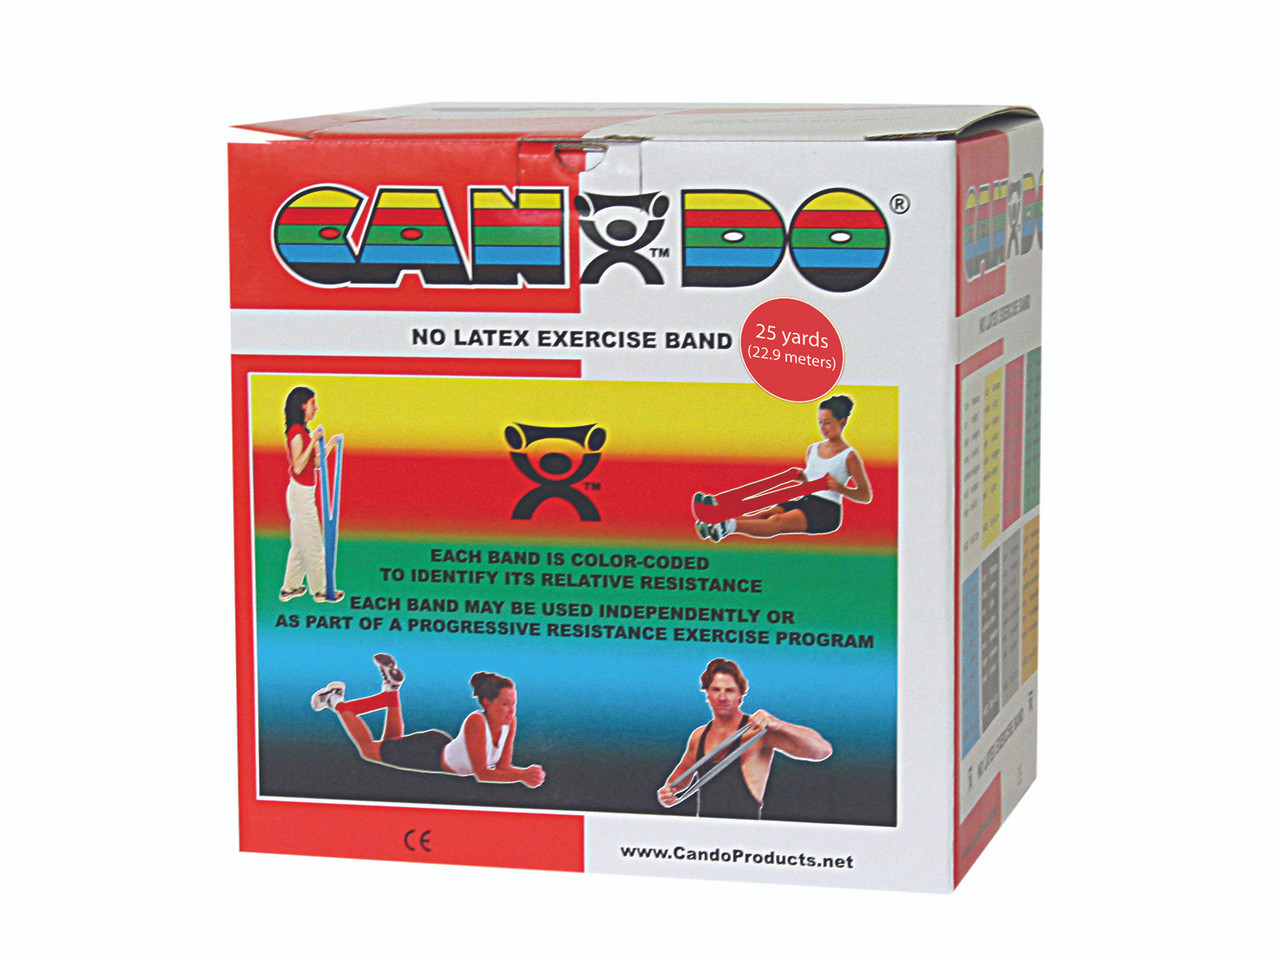 CanDo¨ Latex Free Exercise Band - 25 yard roll - Red - light